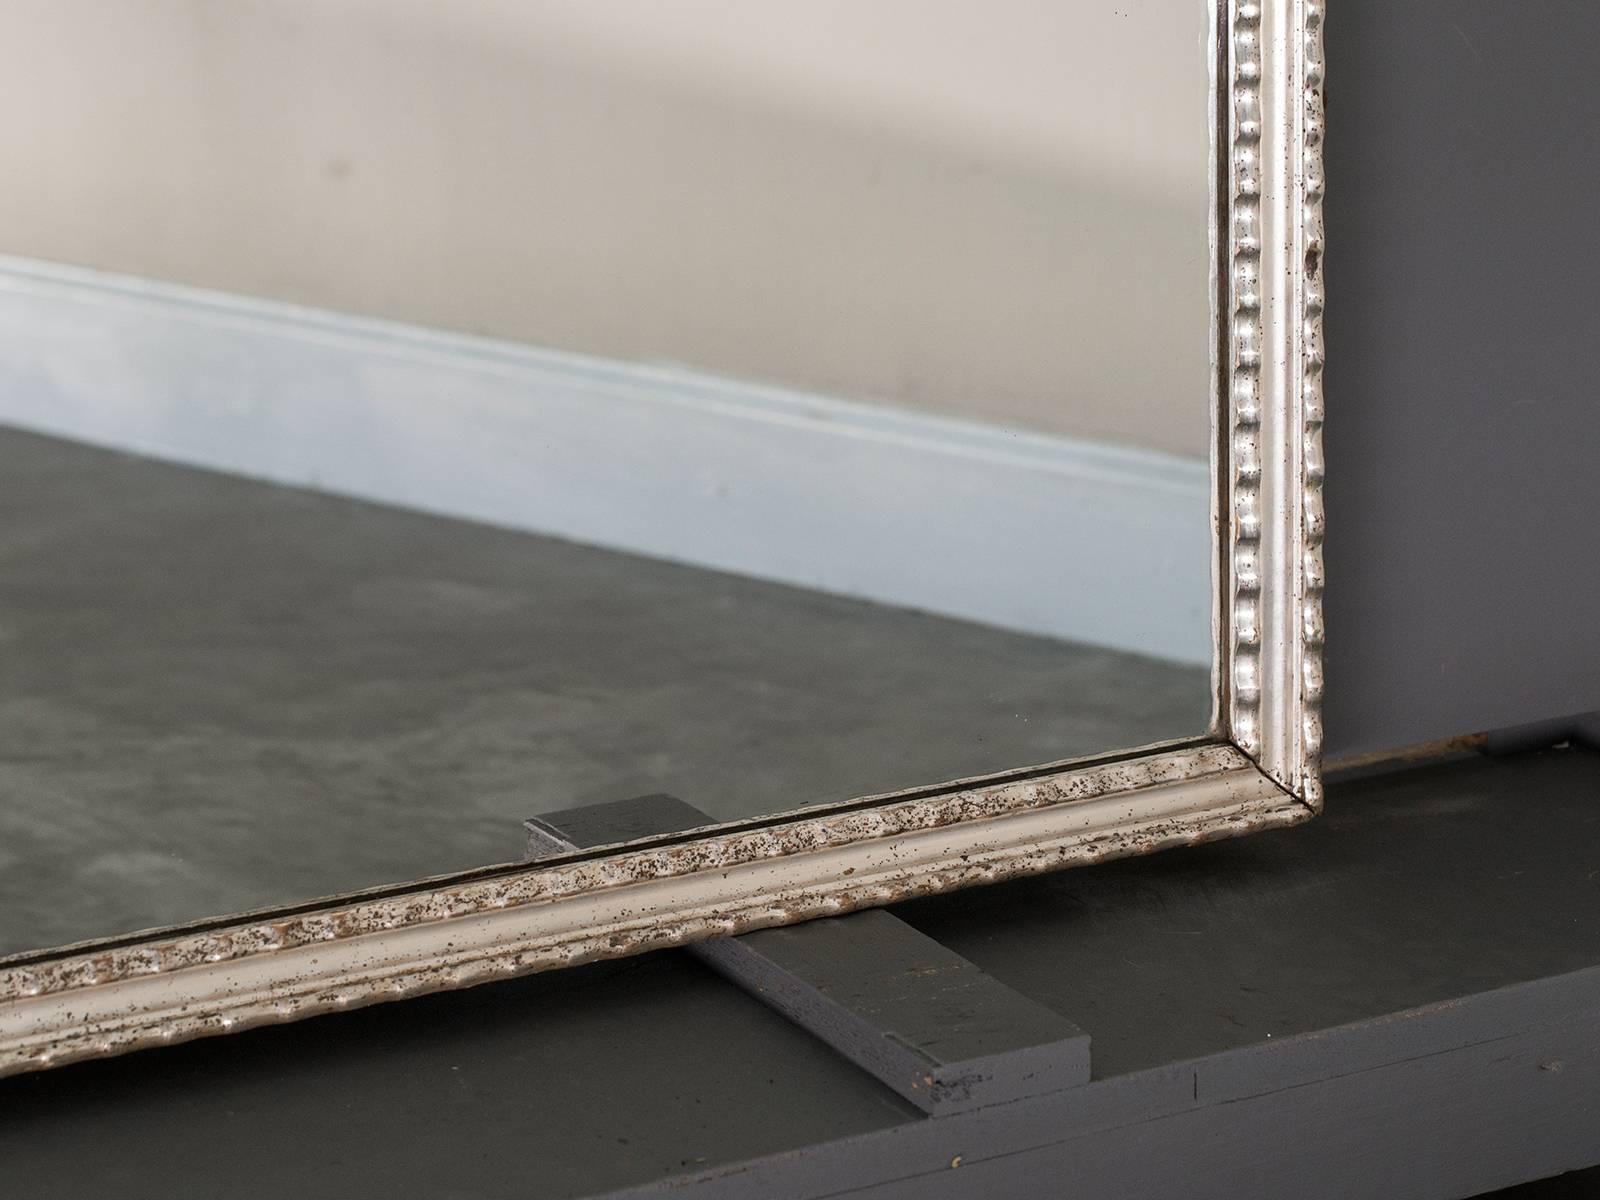 Be the first to see our new listings direct from 1stdibs! Please click "Follow" below. 

The ruffled edge of this rectangular antique French mirror circa 1890 is enhanced by the silver gilt finish. The variations in the silver complement